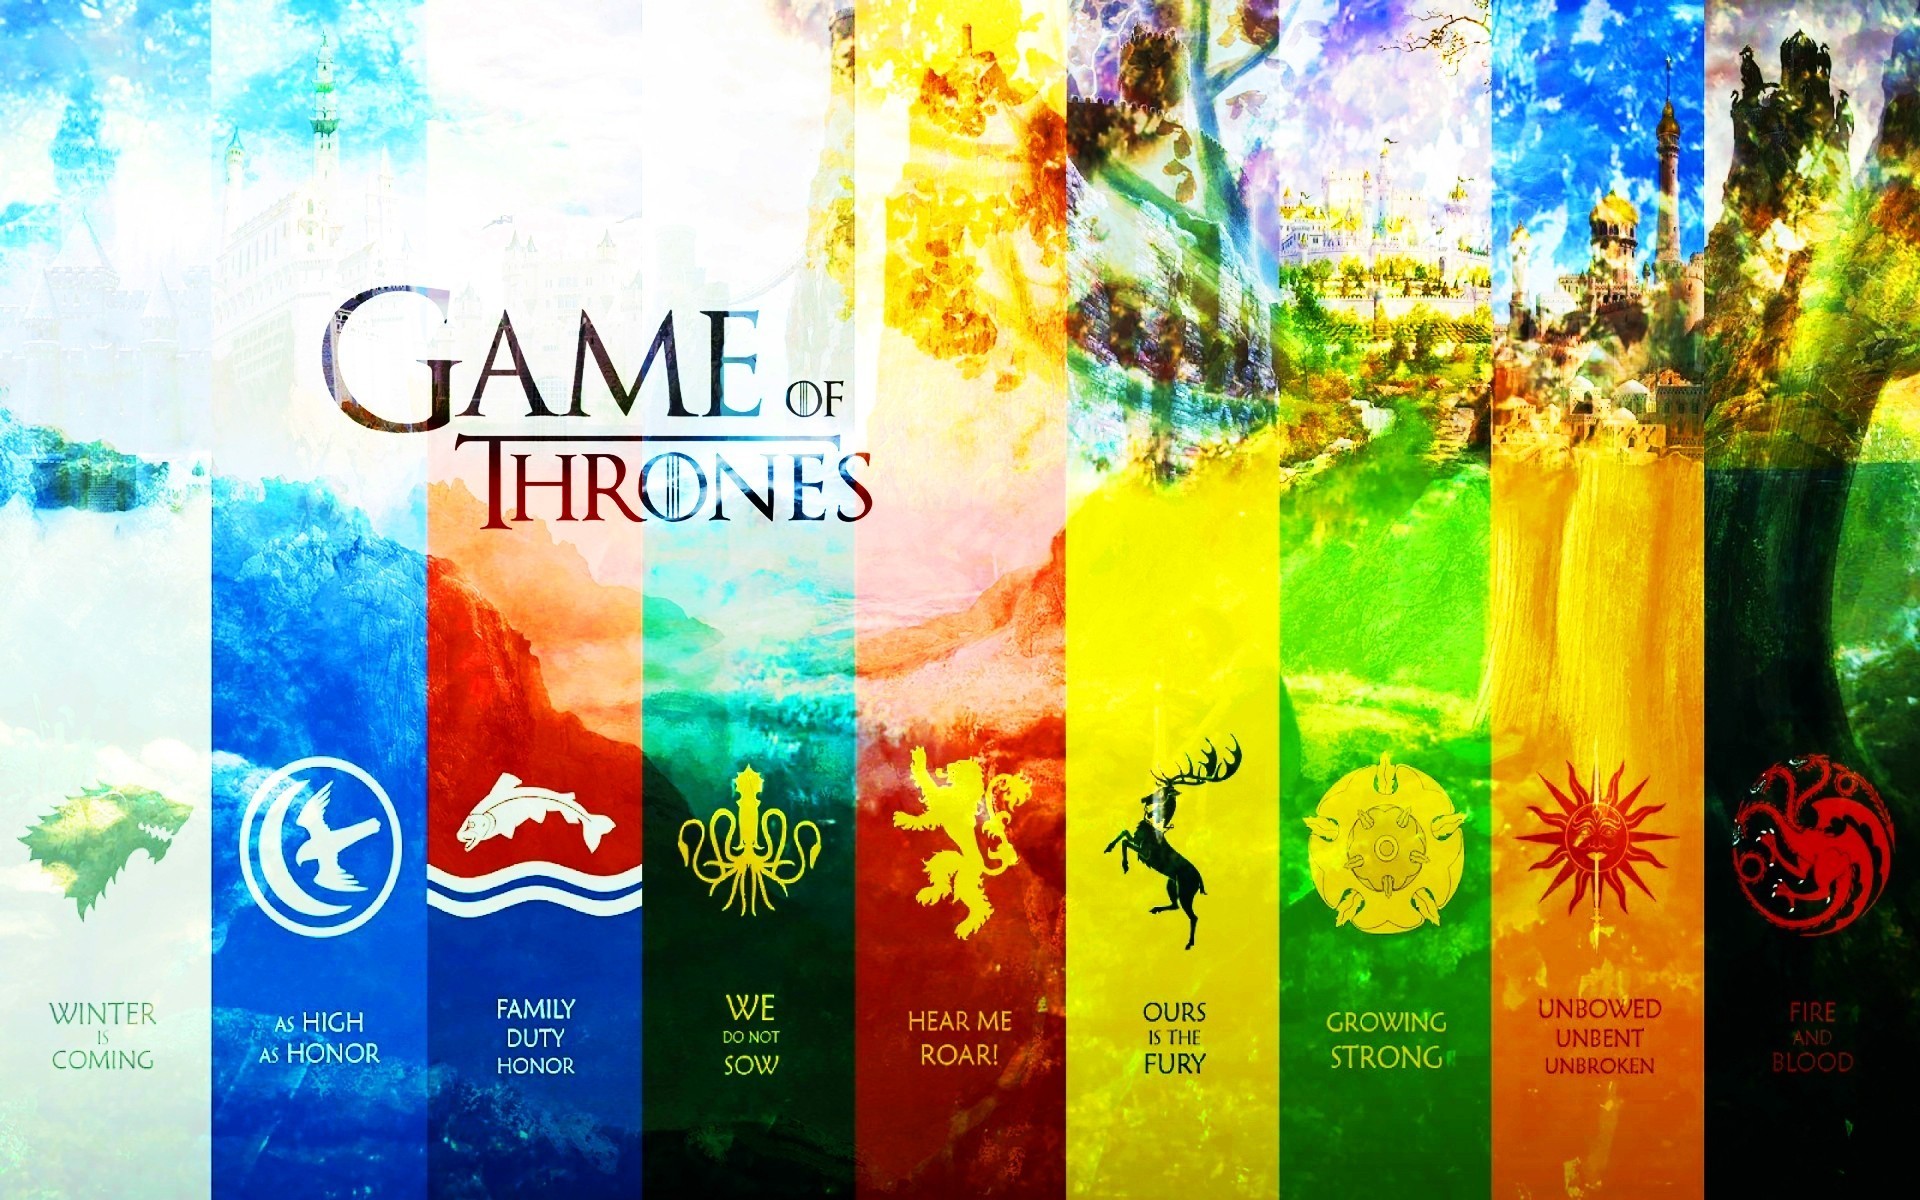 game of thrones houses wallpaper,product,graphic design,font,advertising,drink